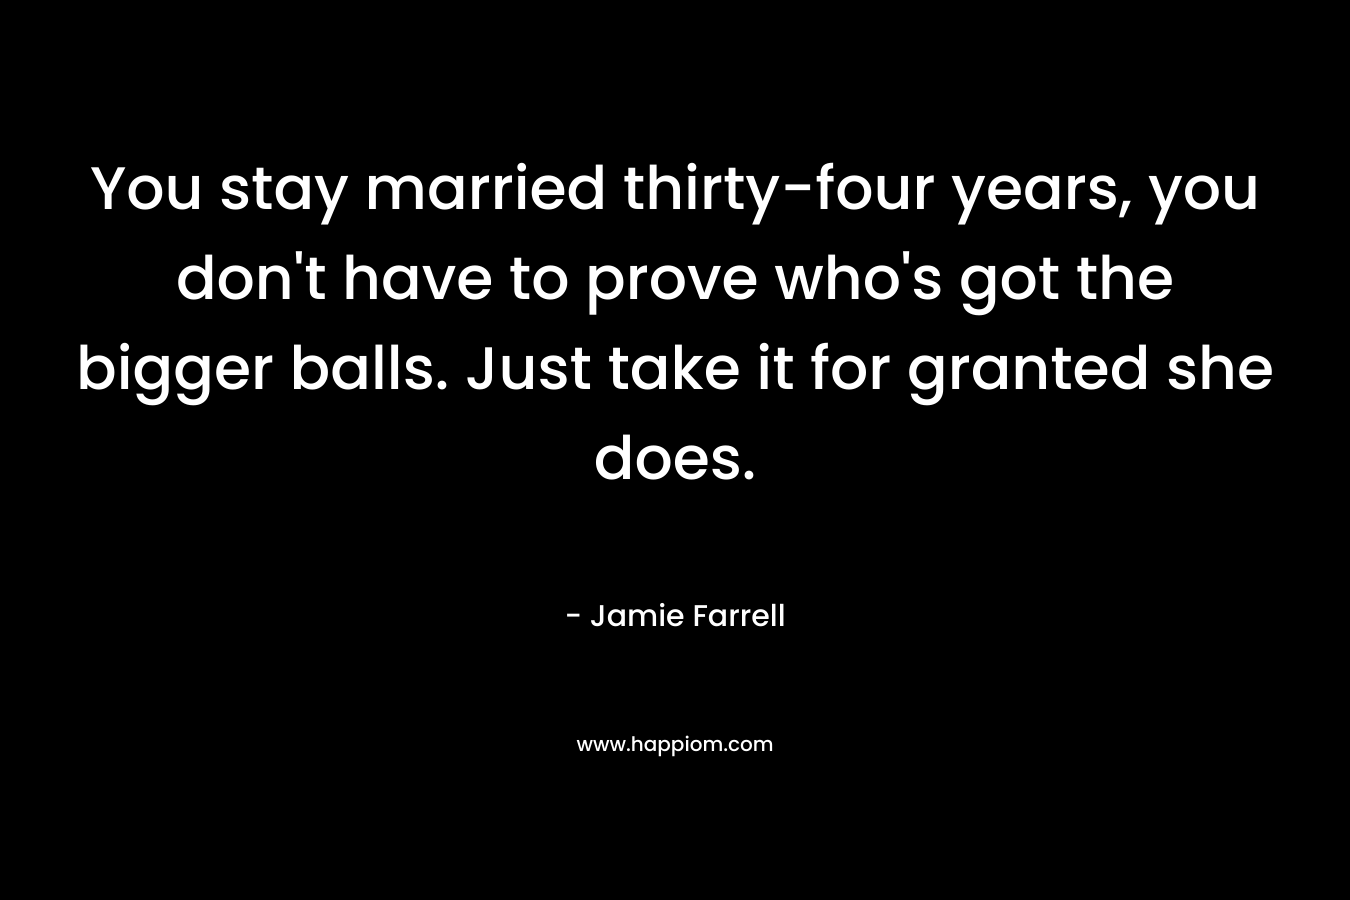 You stay married thirty-four years, you don’t have to prove who’s got the bigger balls. Just take it for granted she does. – Jamie Farrell